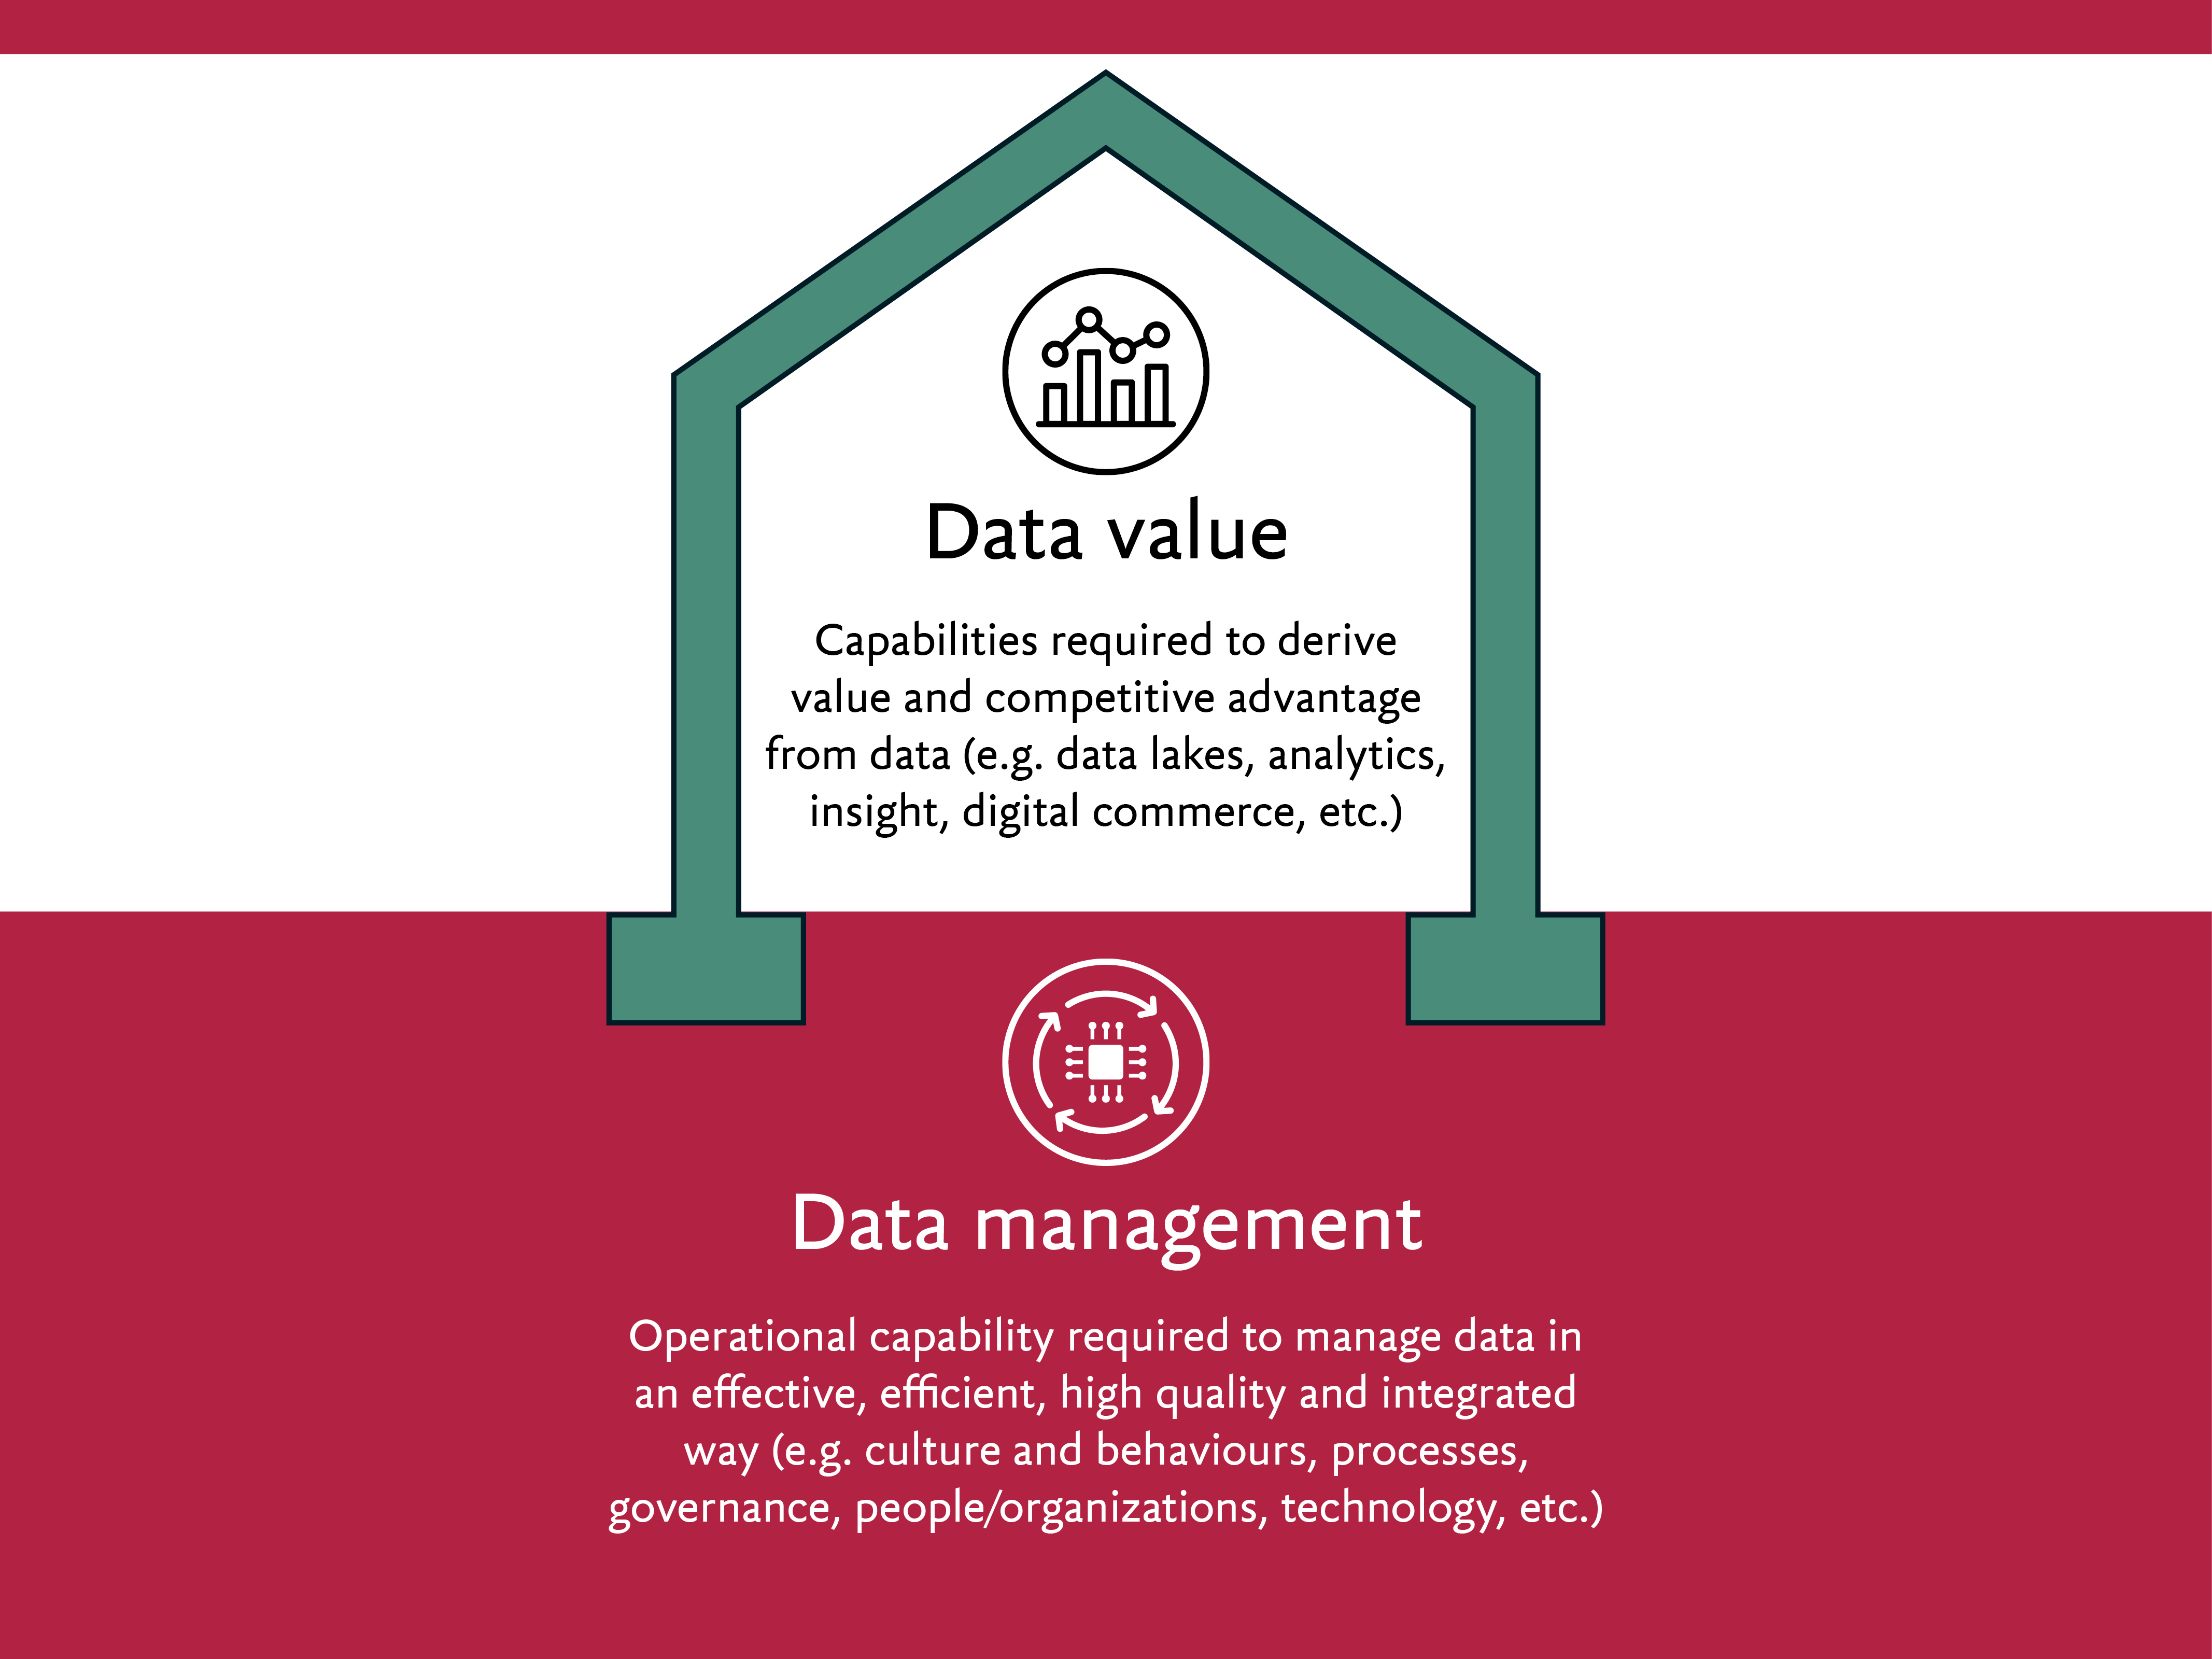 Diagram illustrating how data management is the foundation that enables data value